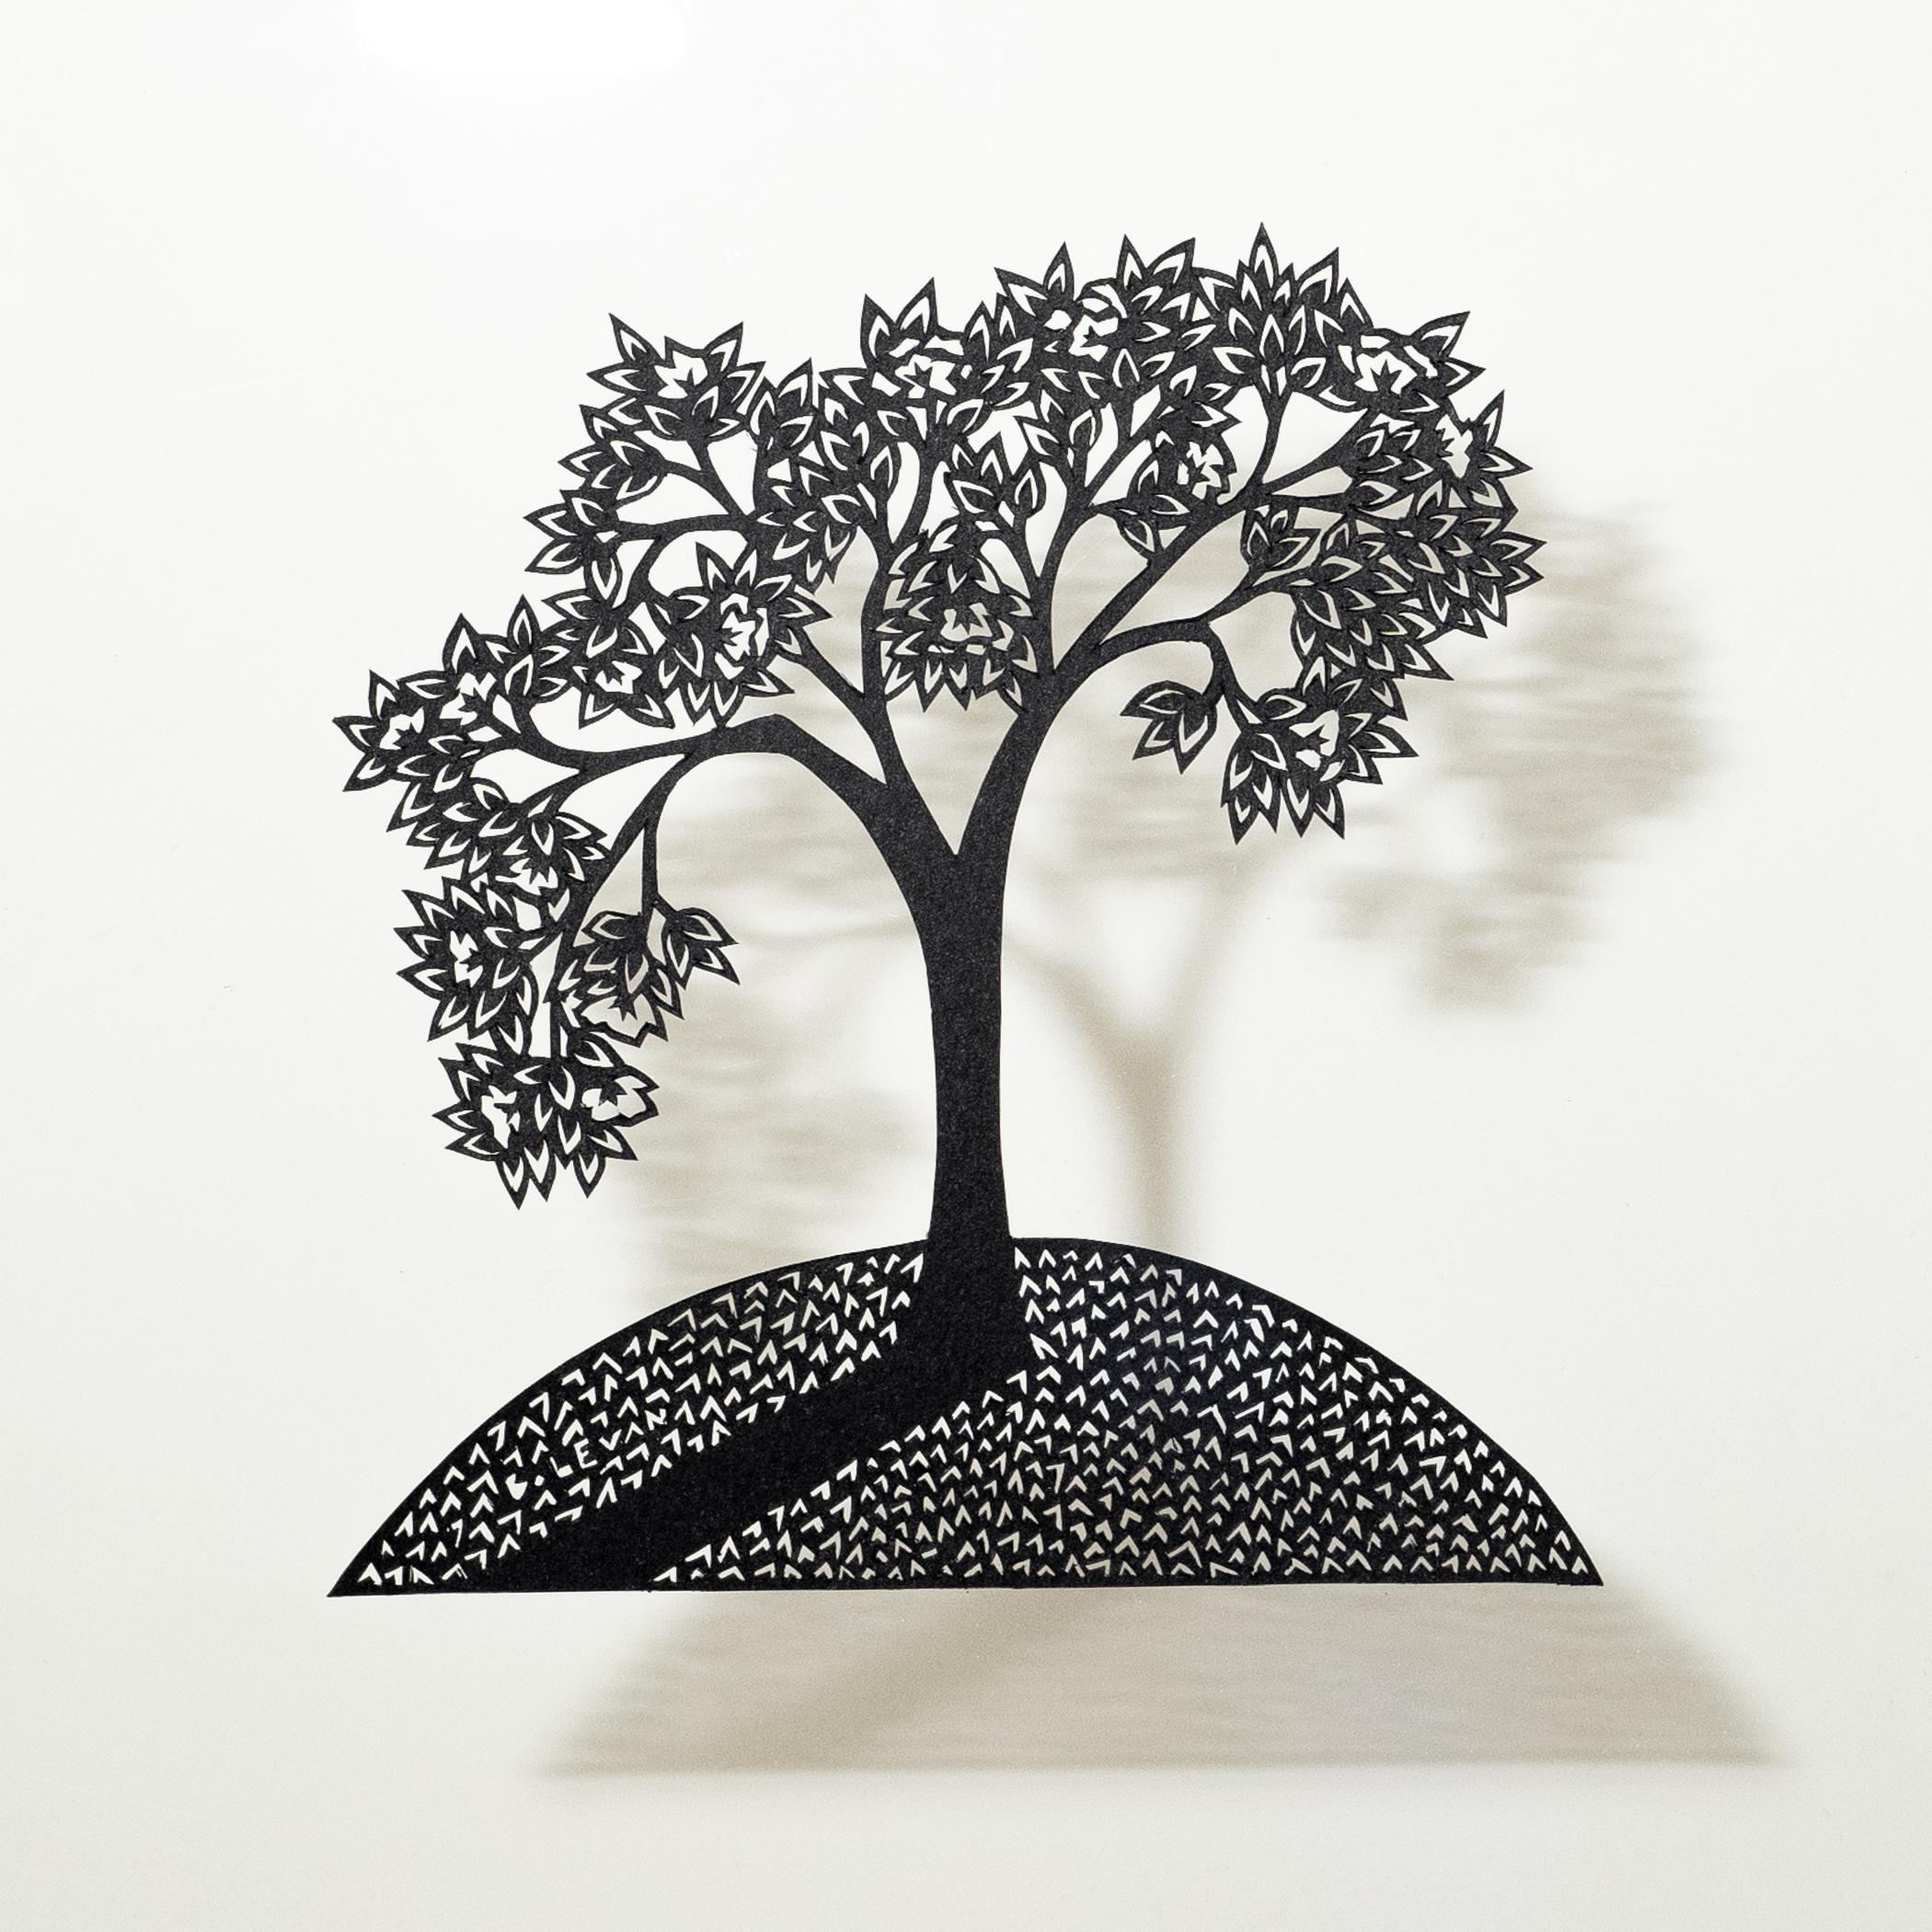 "Longing" A Series of 4 Depicting a Tree's Moving Shadow by Bianca Levan